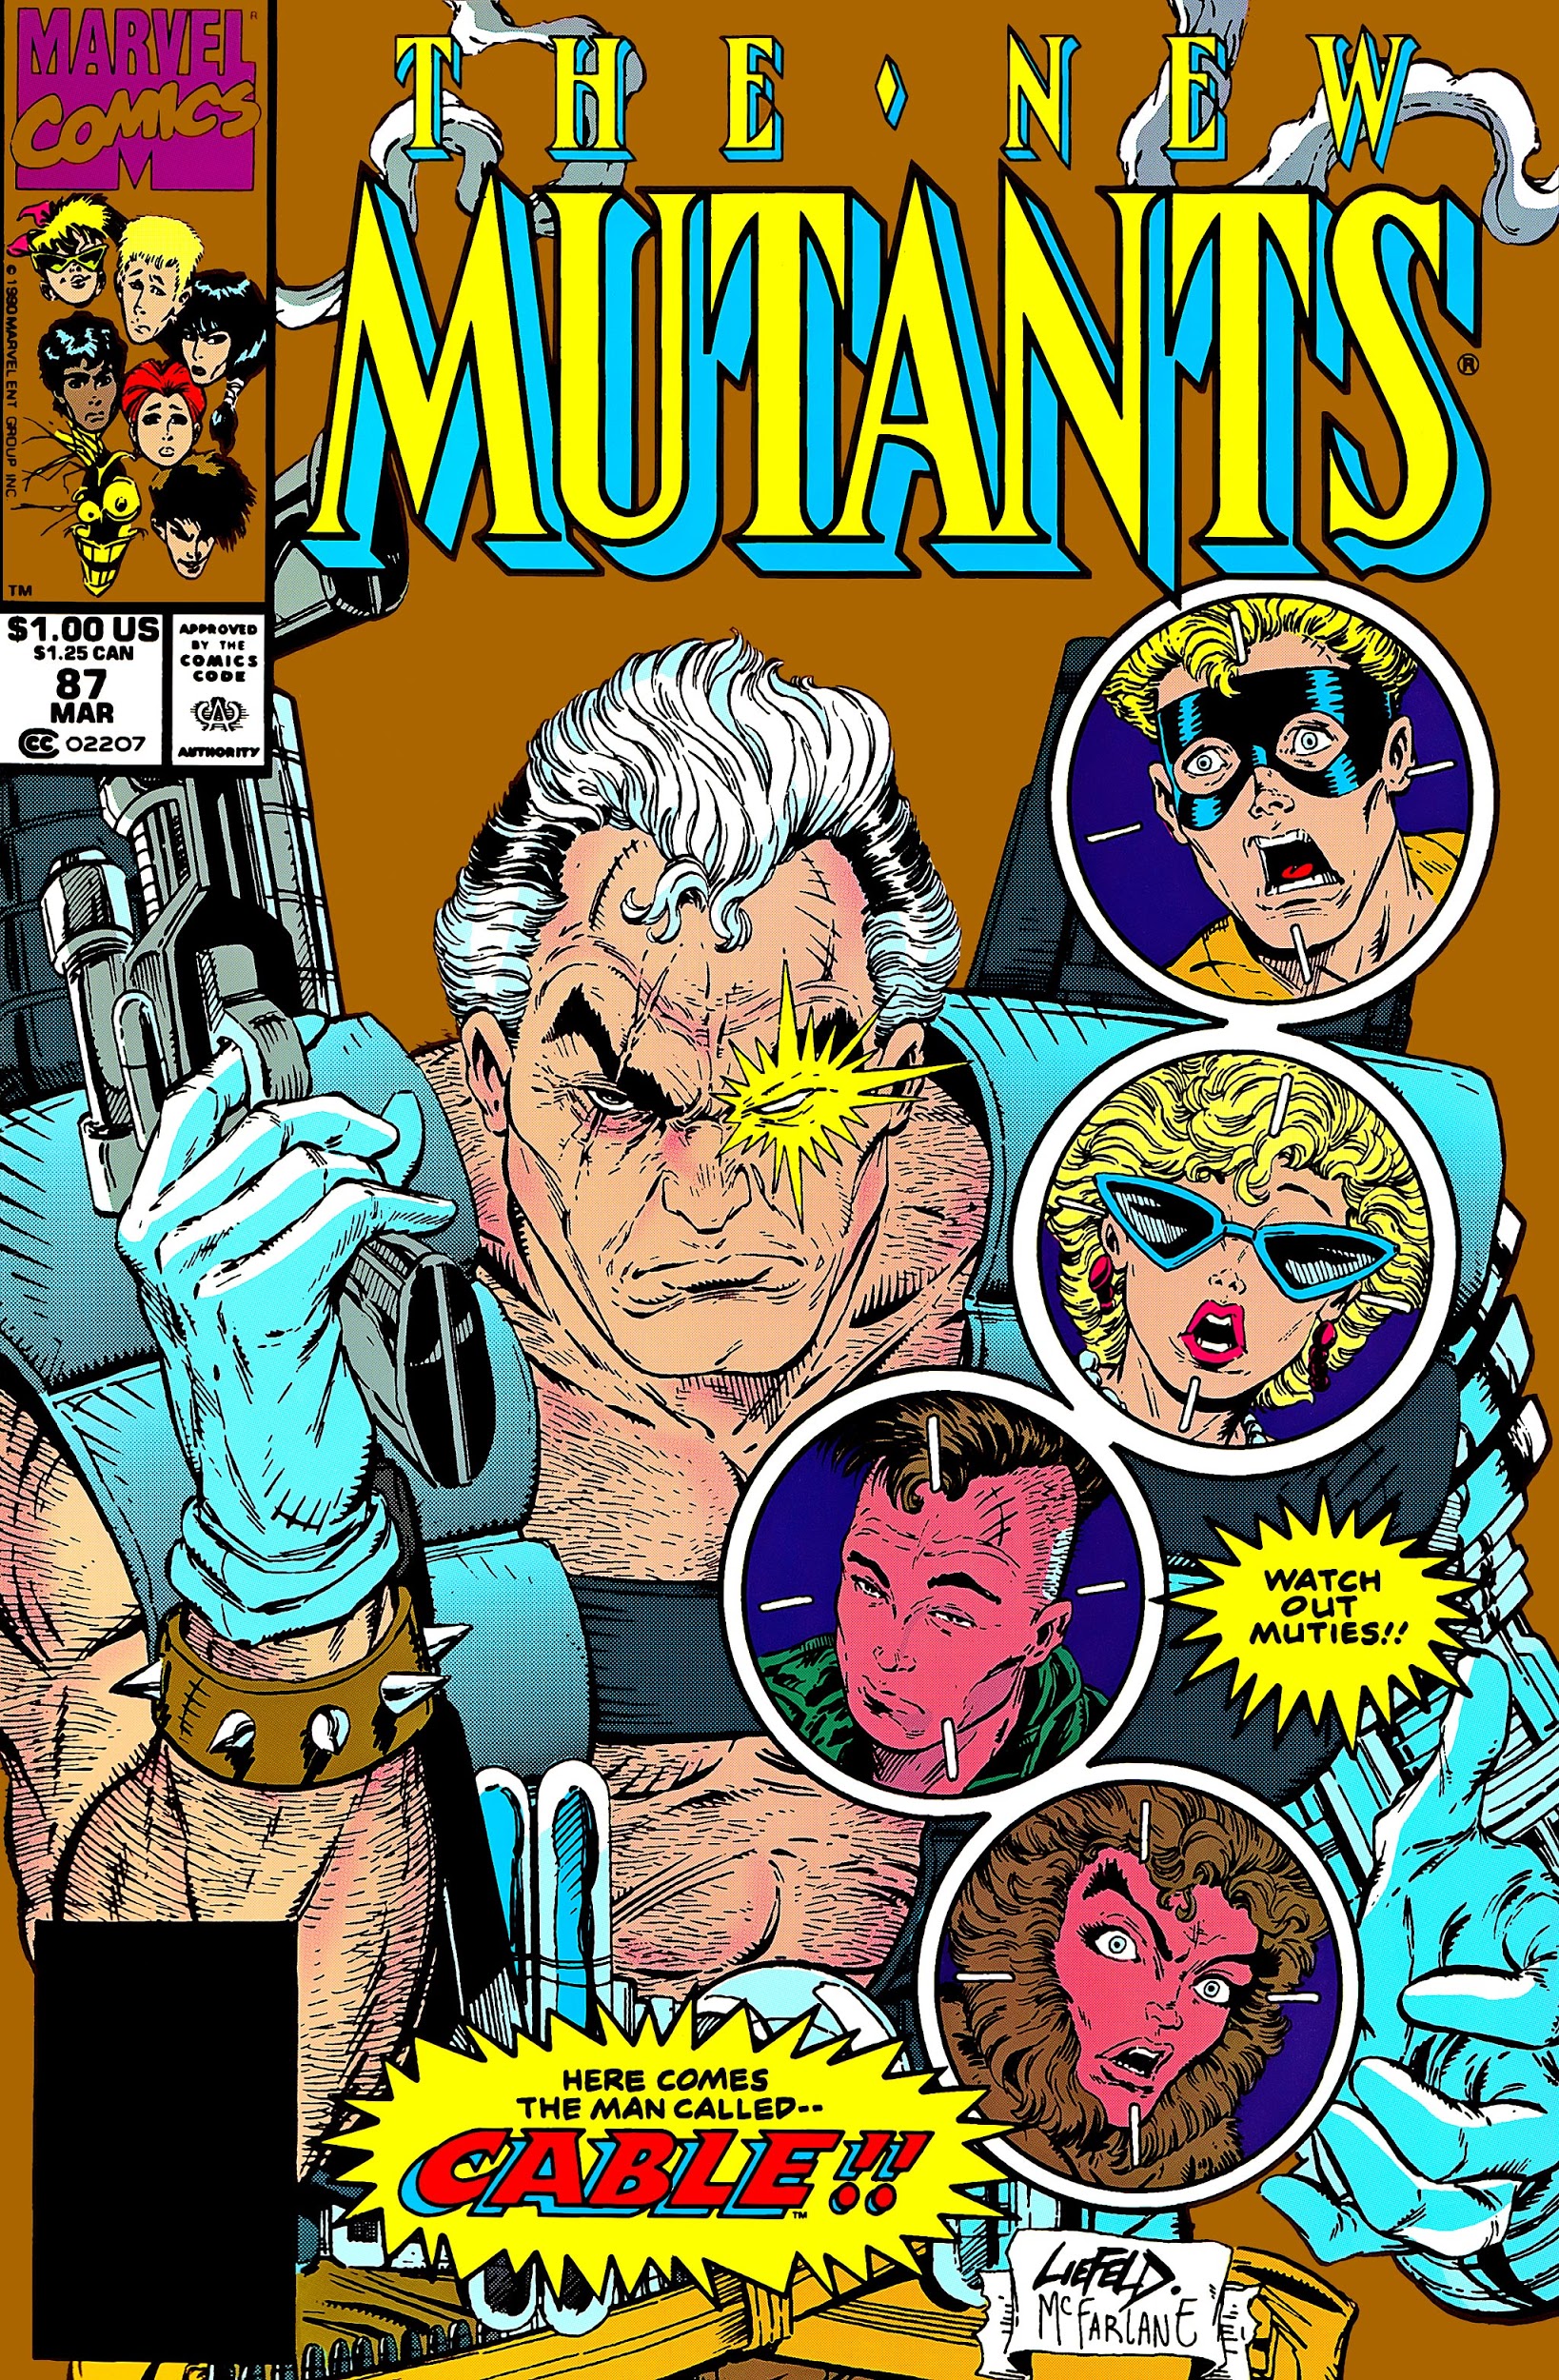 X-Force: Cable and the New Mutants by Louise Simonson